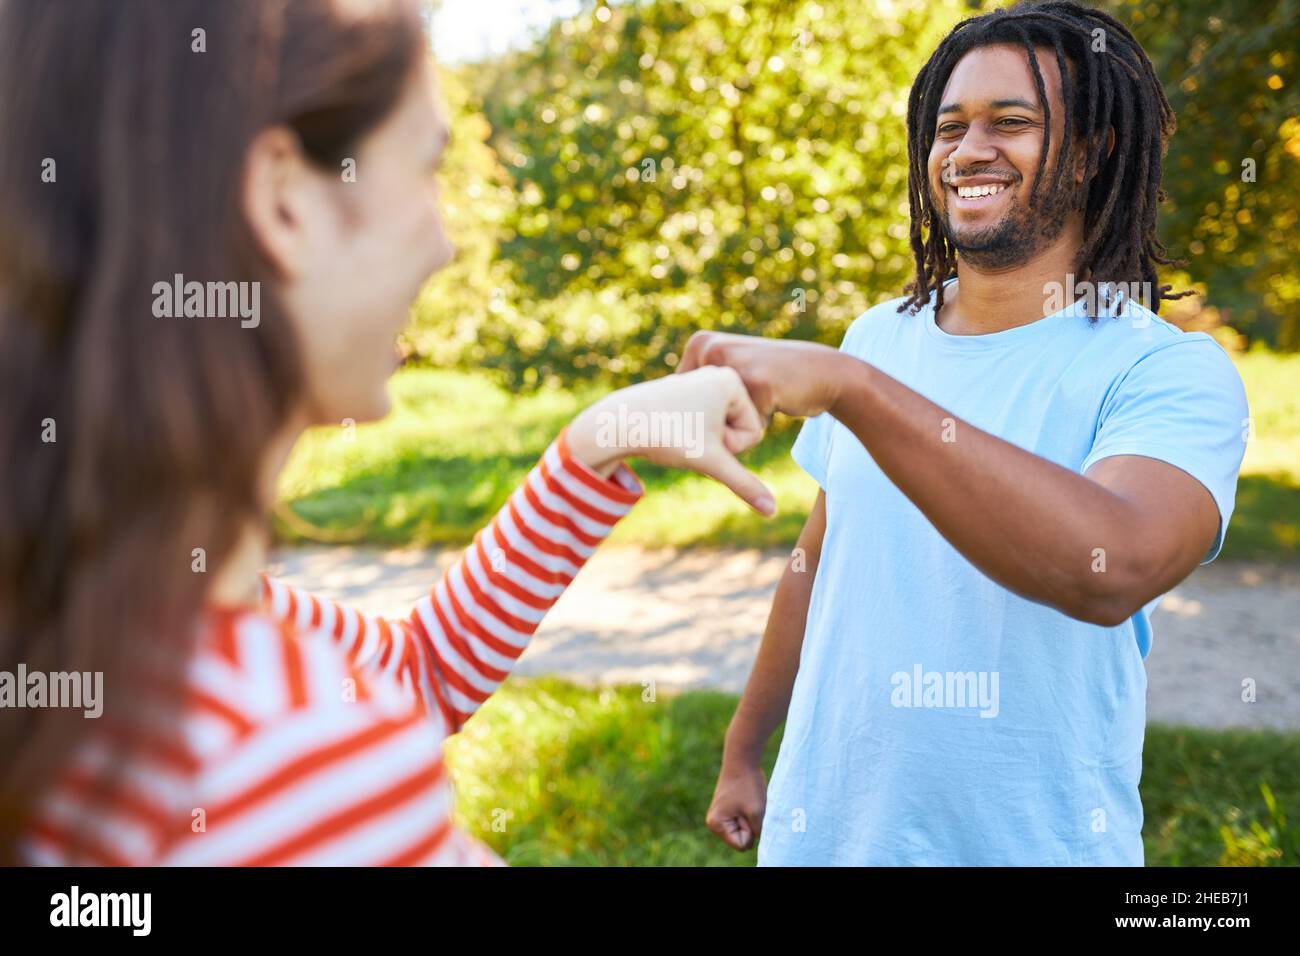 Young African man makes fist bump with girlfriend as a greeting and motivation Stock Photo